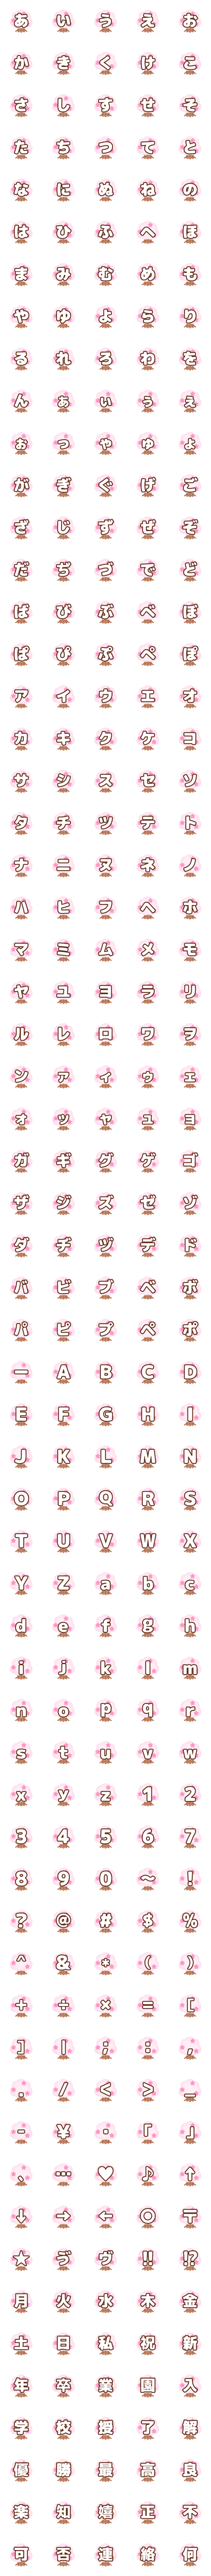 [LINE絵文字]～春を感じる～桜の木デコ文字 茶色 丸ゴシの画像一覧